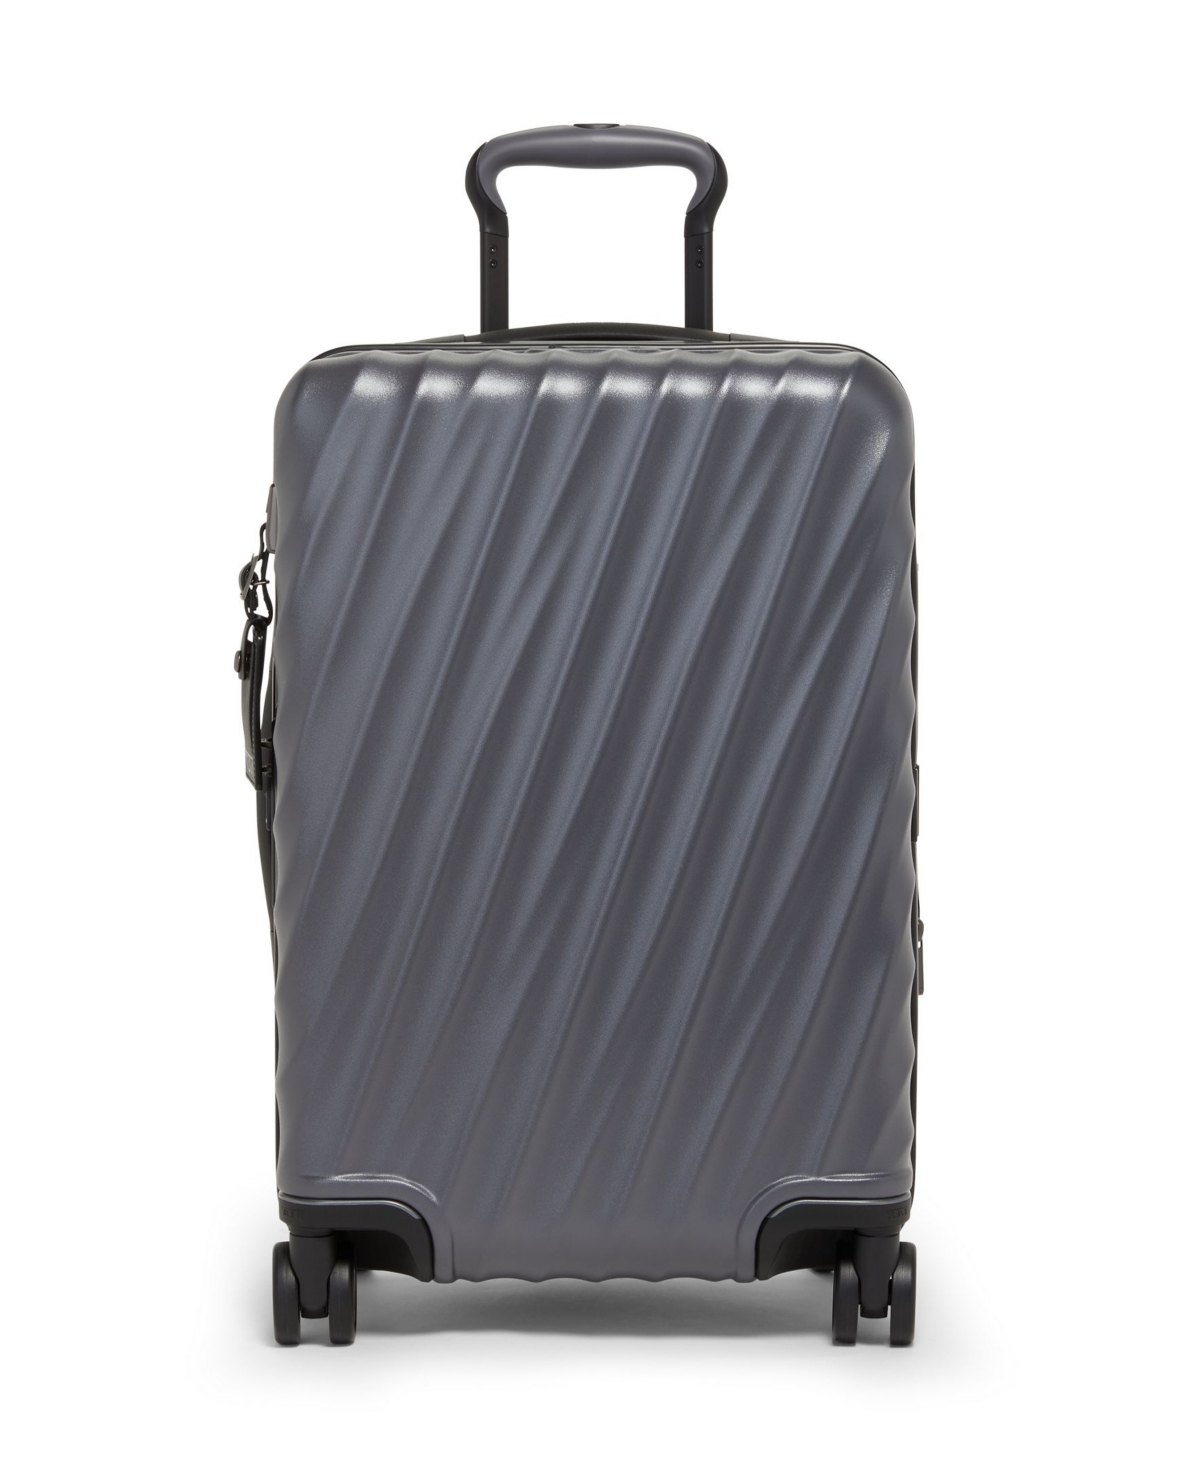 Tumi 19 Degree International Expandable 4 Wheeled Carry-on In Gray Texture